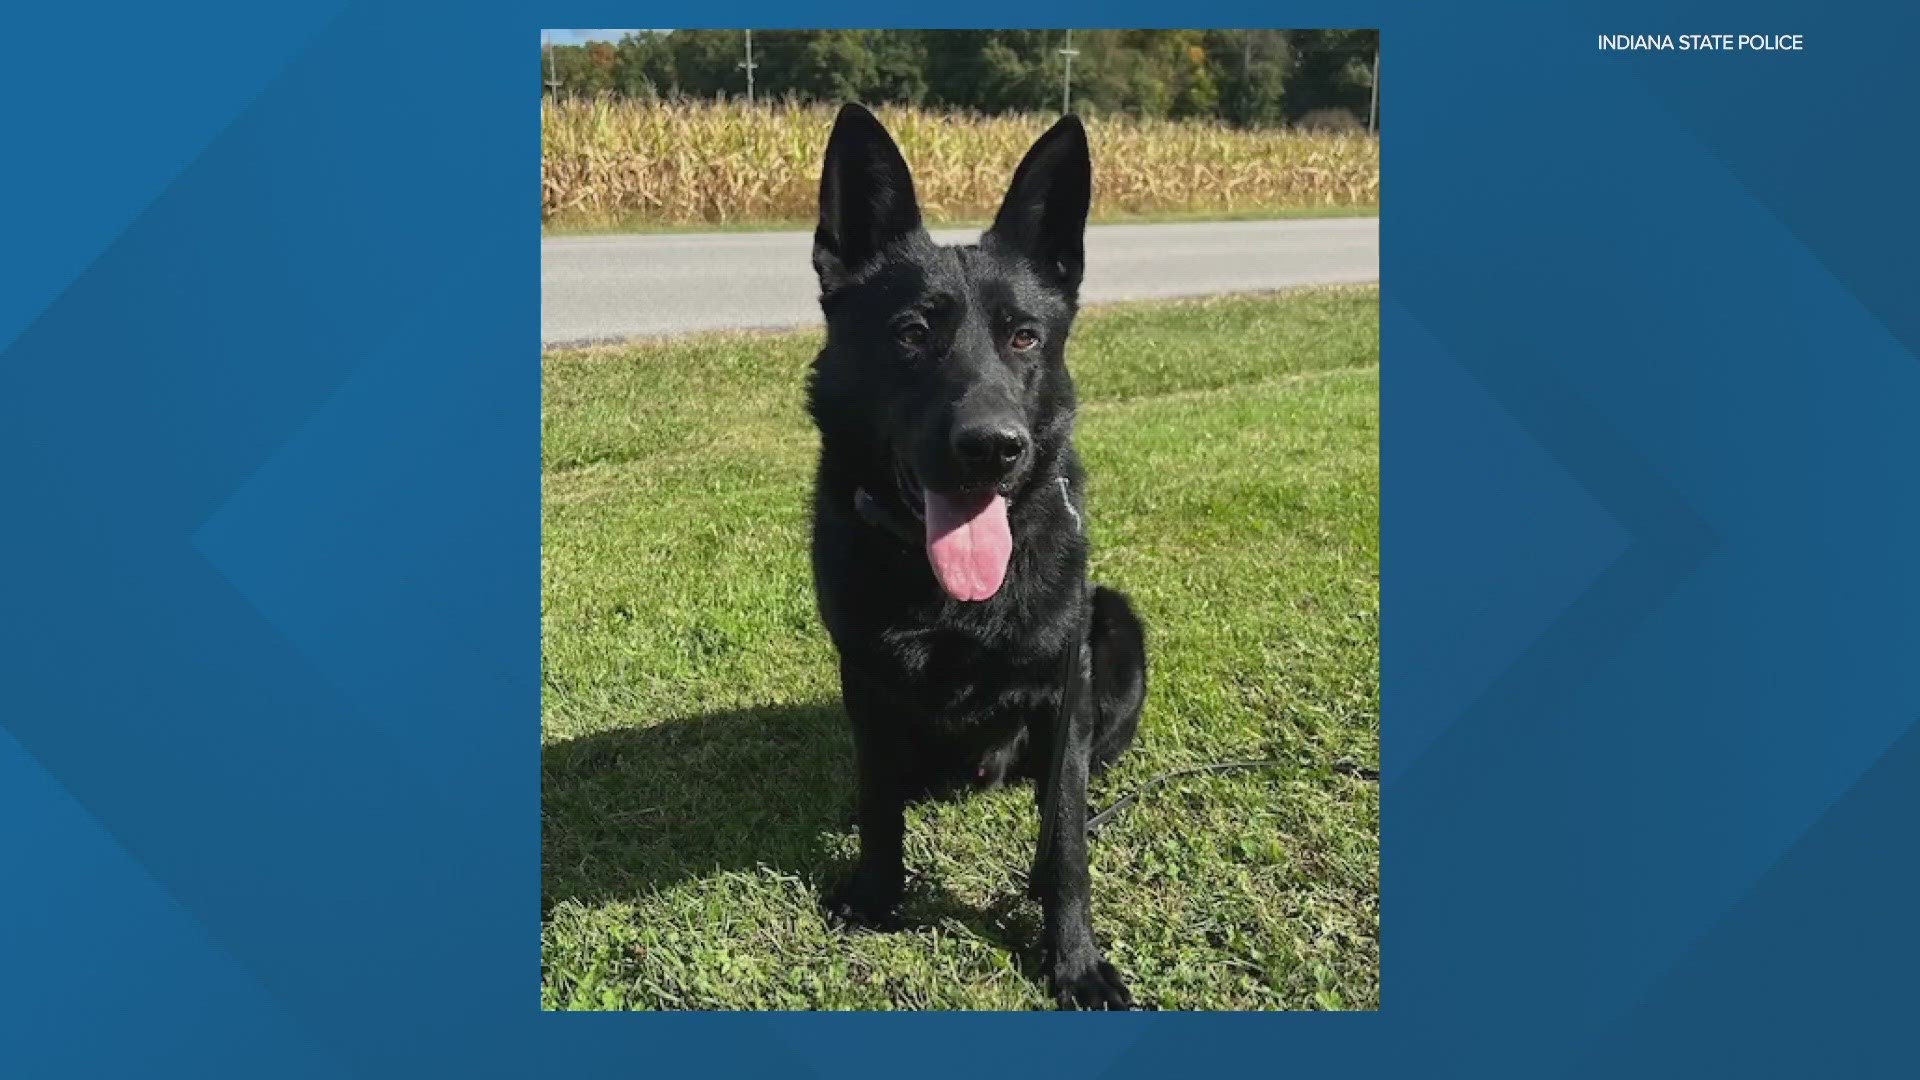 An Indiana State Police K-9 will soon have extra protection when responding to calls.